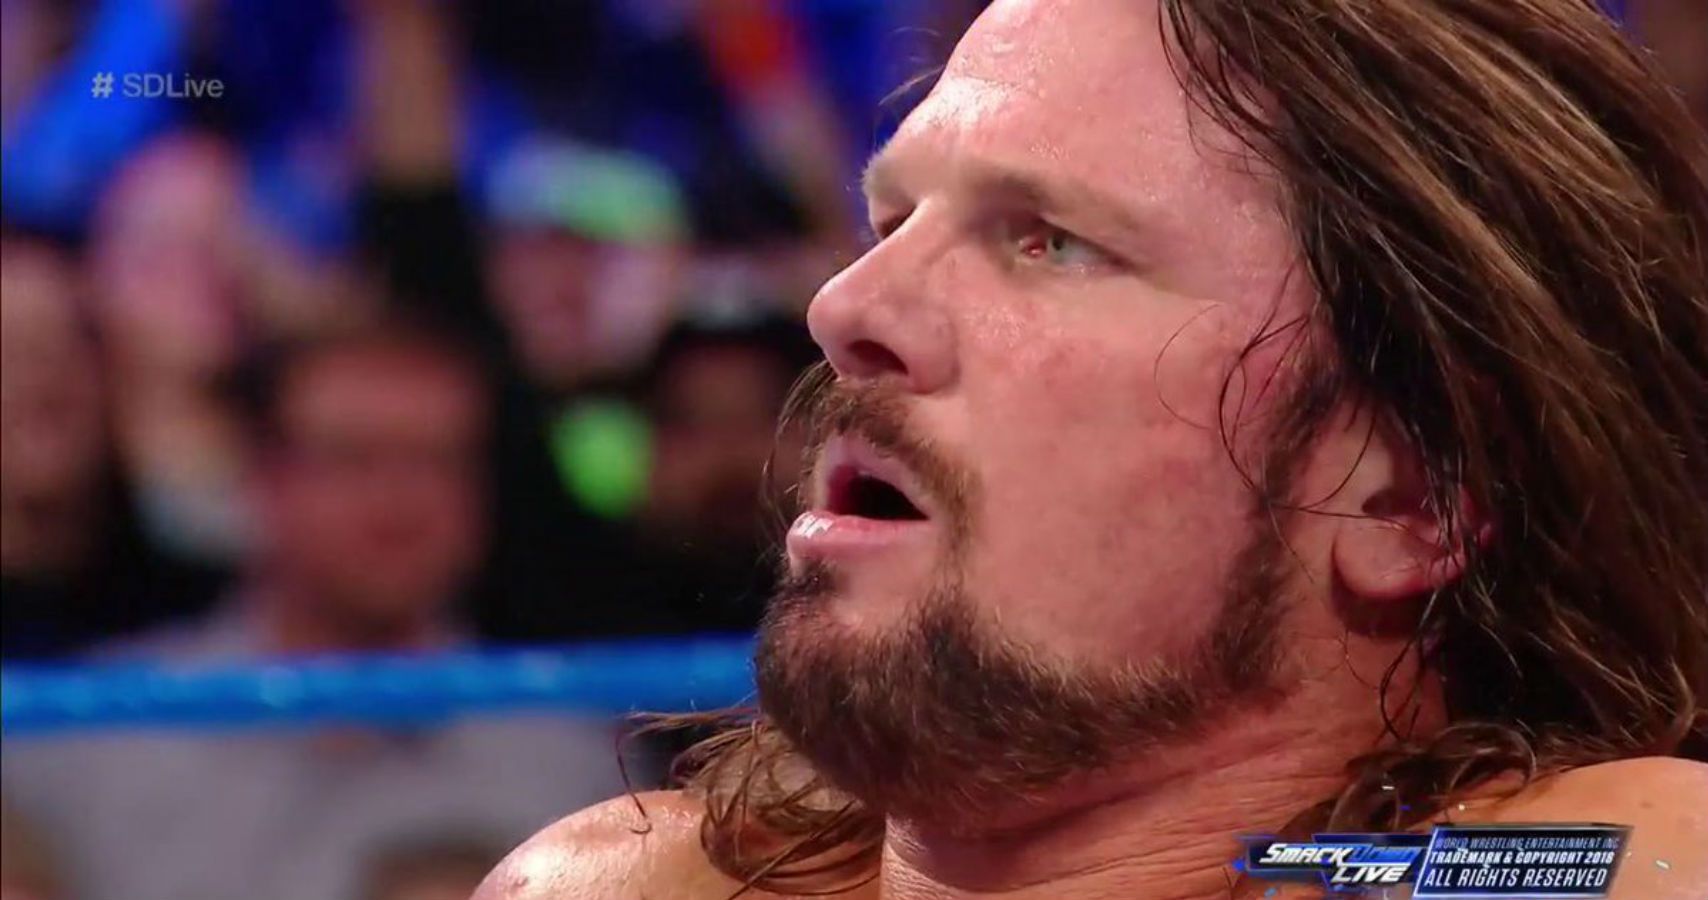 AJ Styles To Defend WWE Championship In Strange Match At Royal Rumble